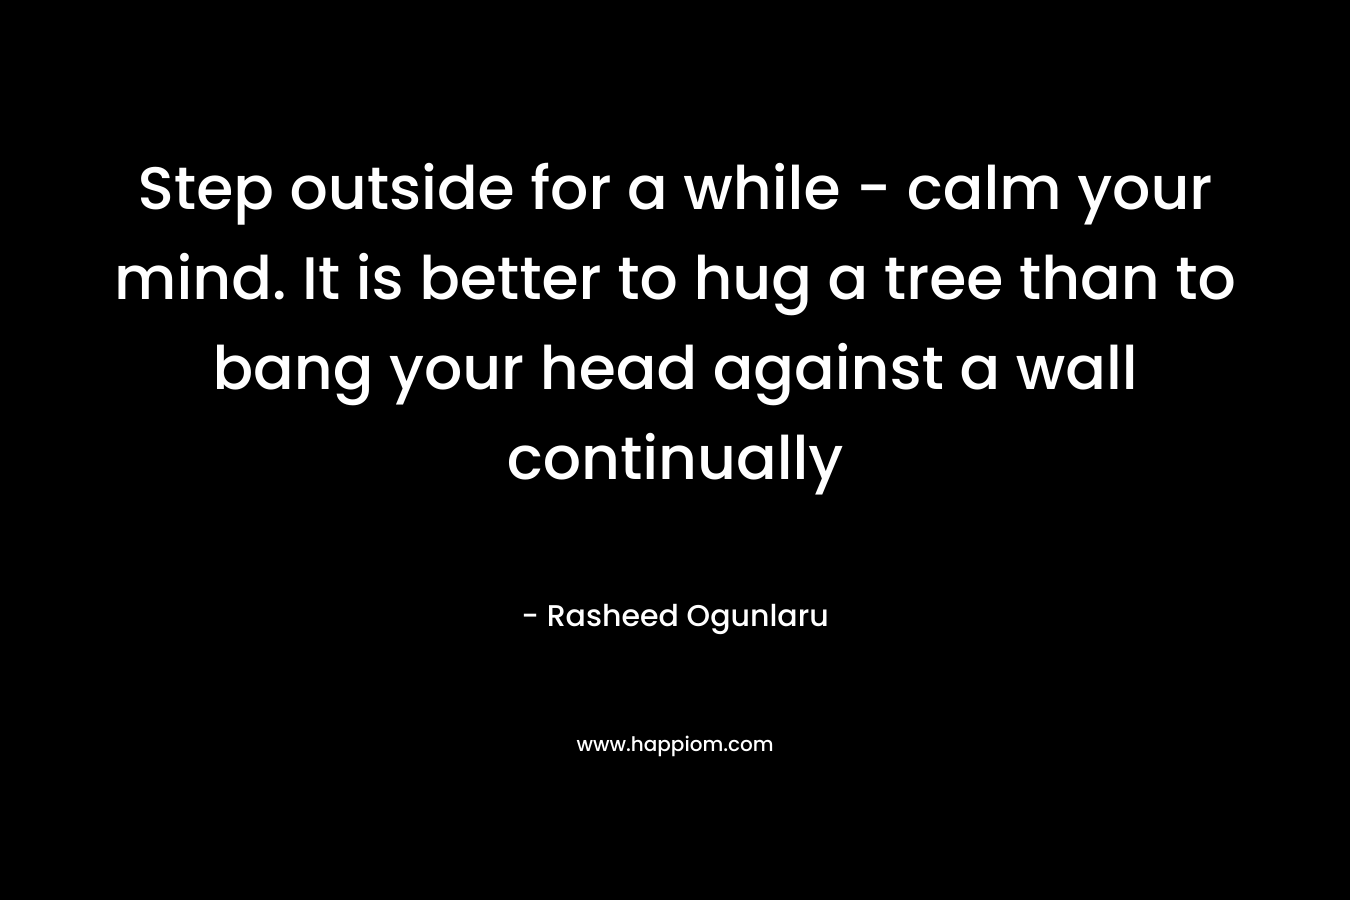 Step outside for a while – calm your mind. It is better to hug a tree than to bang your head against a wall continually – Rasheed Ogunlaru